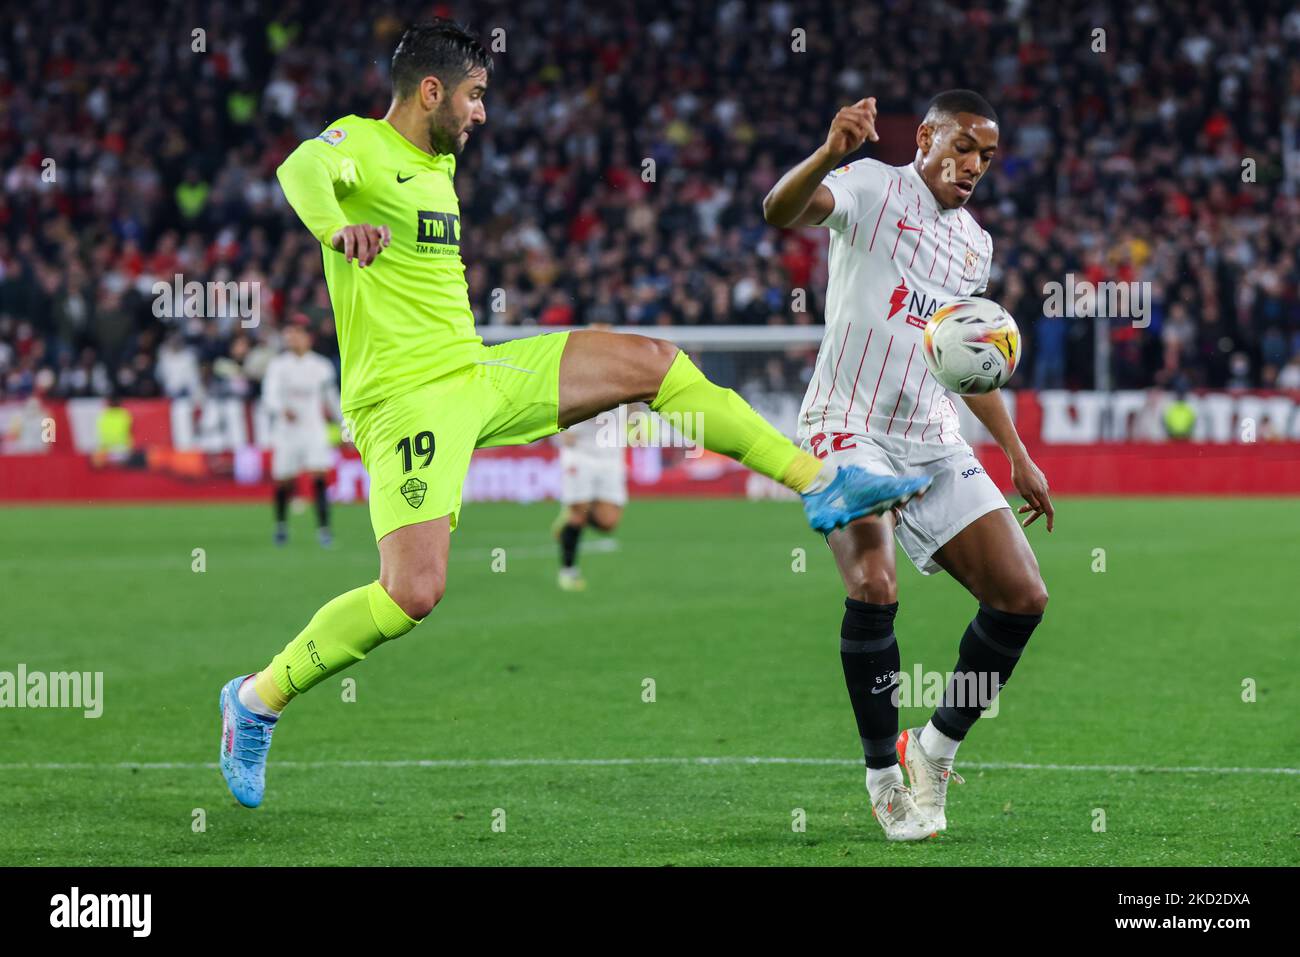 Anthony Martial of Sevilla CF competes for the ball with Antonio Barragan of Elche CF during the La Liga Santader match between Sevilla CF and Elche CF at Ramon Sanchez Pizjuan in Seville, Spain, on February 11, 2022. (Credit: Jose Luis Contreras) (Photo by DAX Images/NurPhoto) Stock Photo